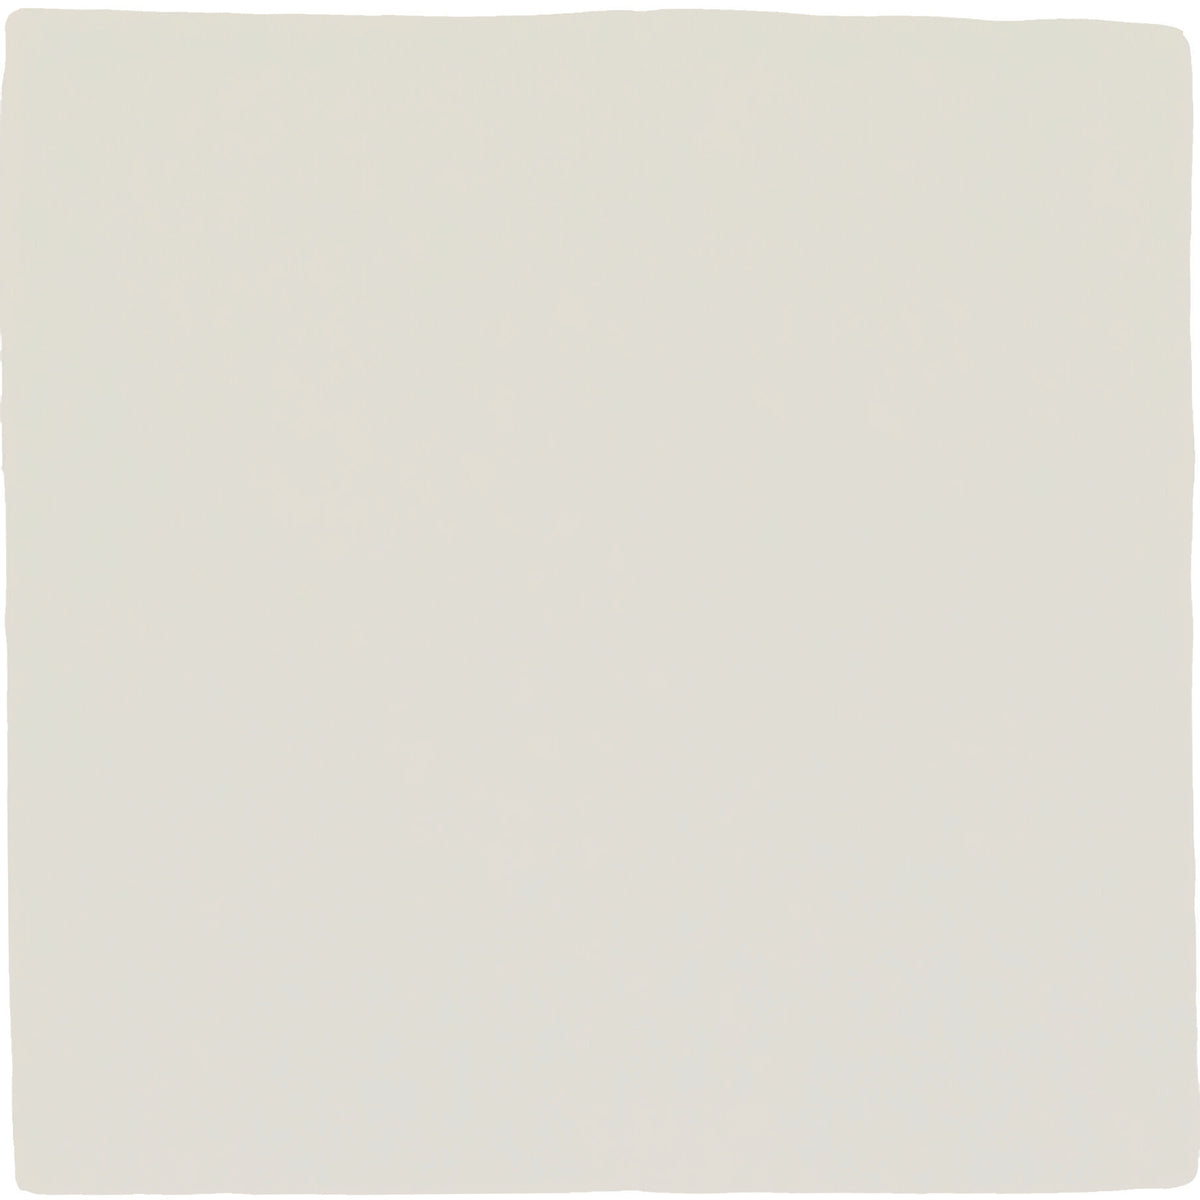 Daltile - Farrier - 5 in. x 5 in. Glazed Ceramic Wall Tile - Andalusian Grey